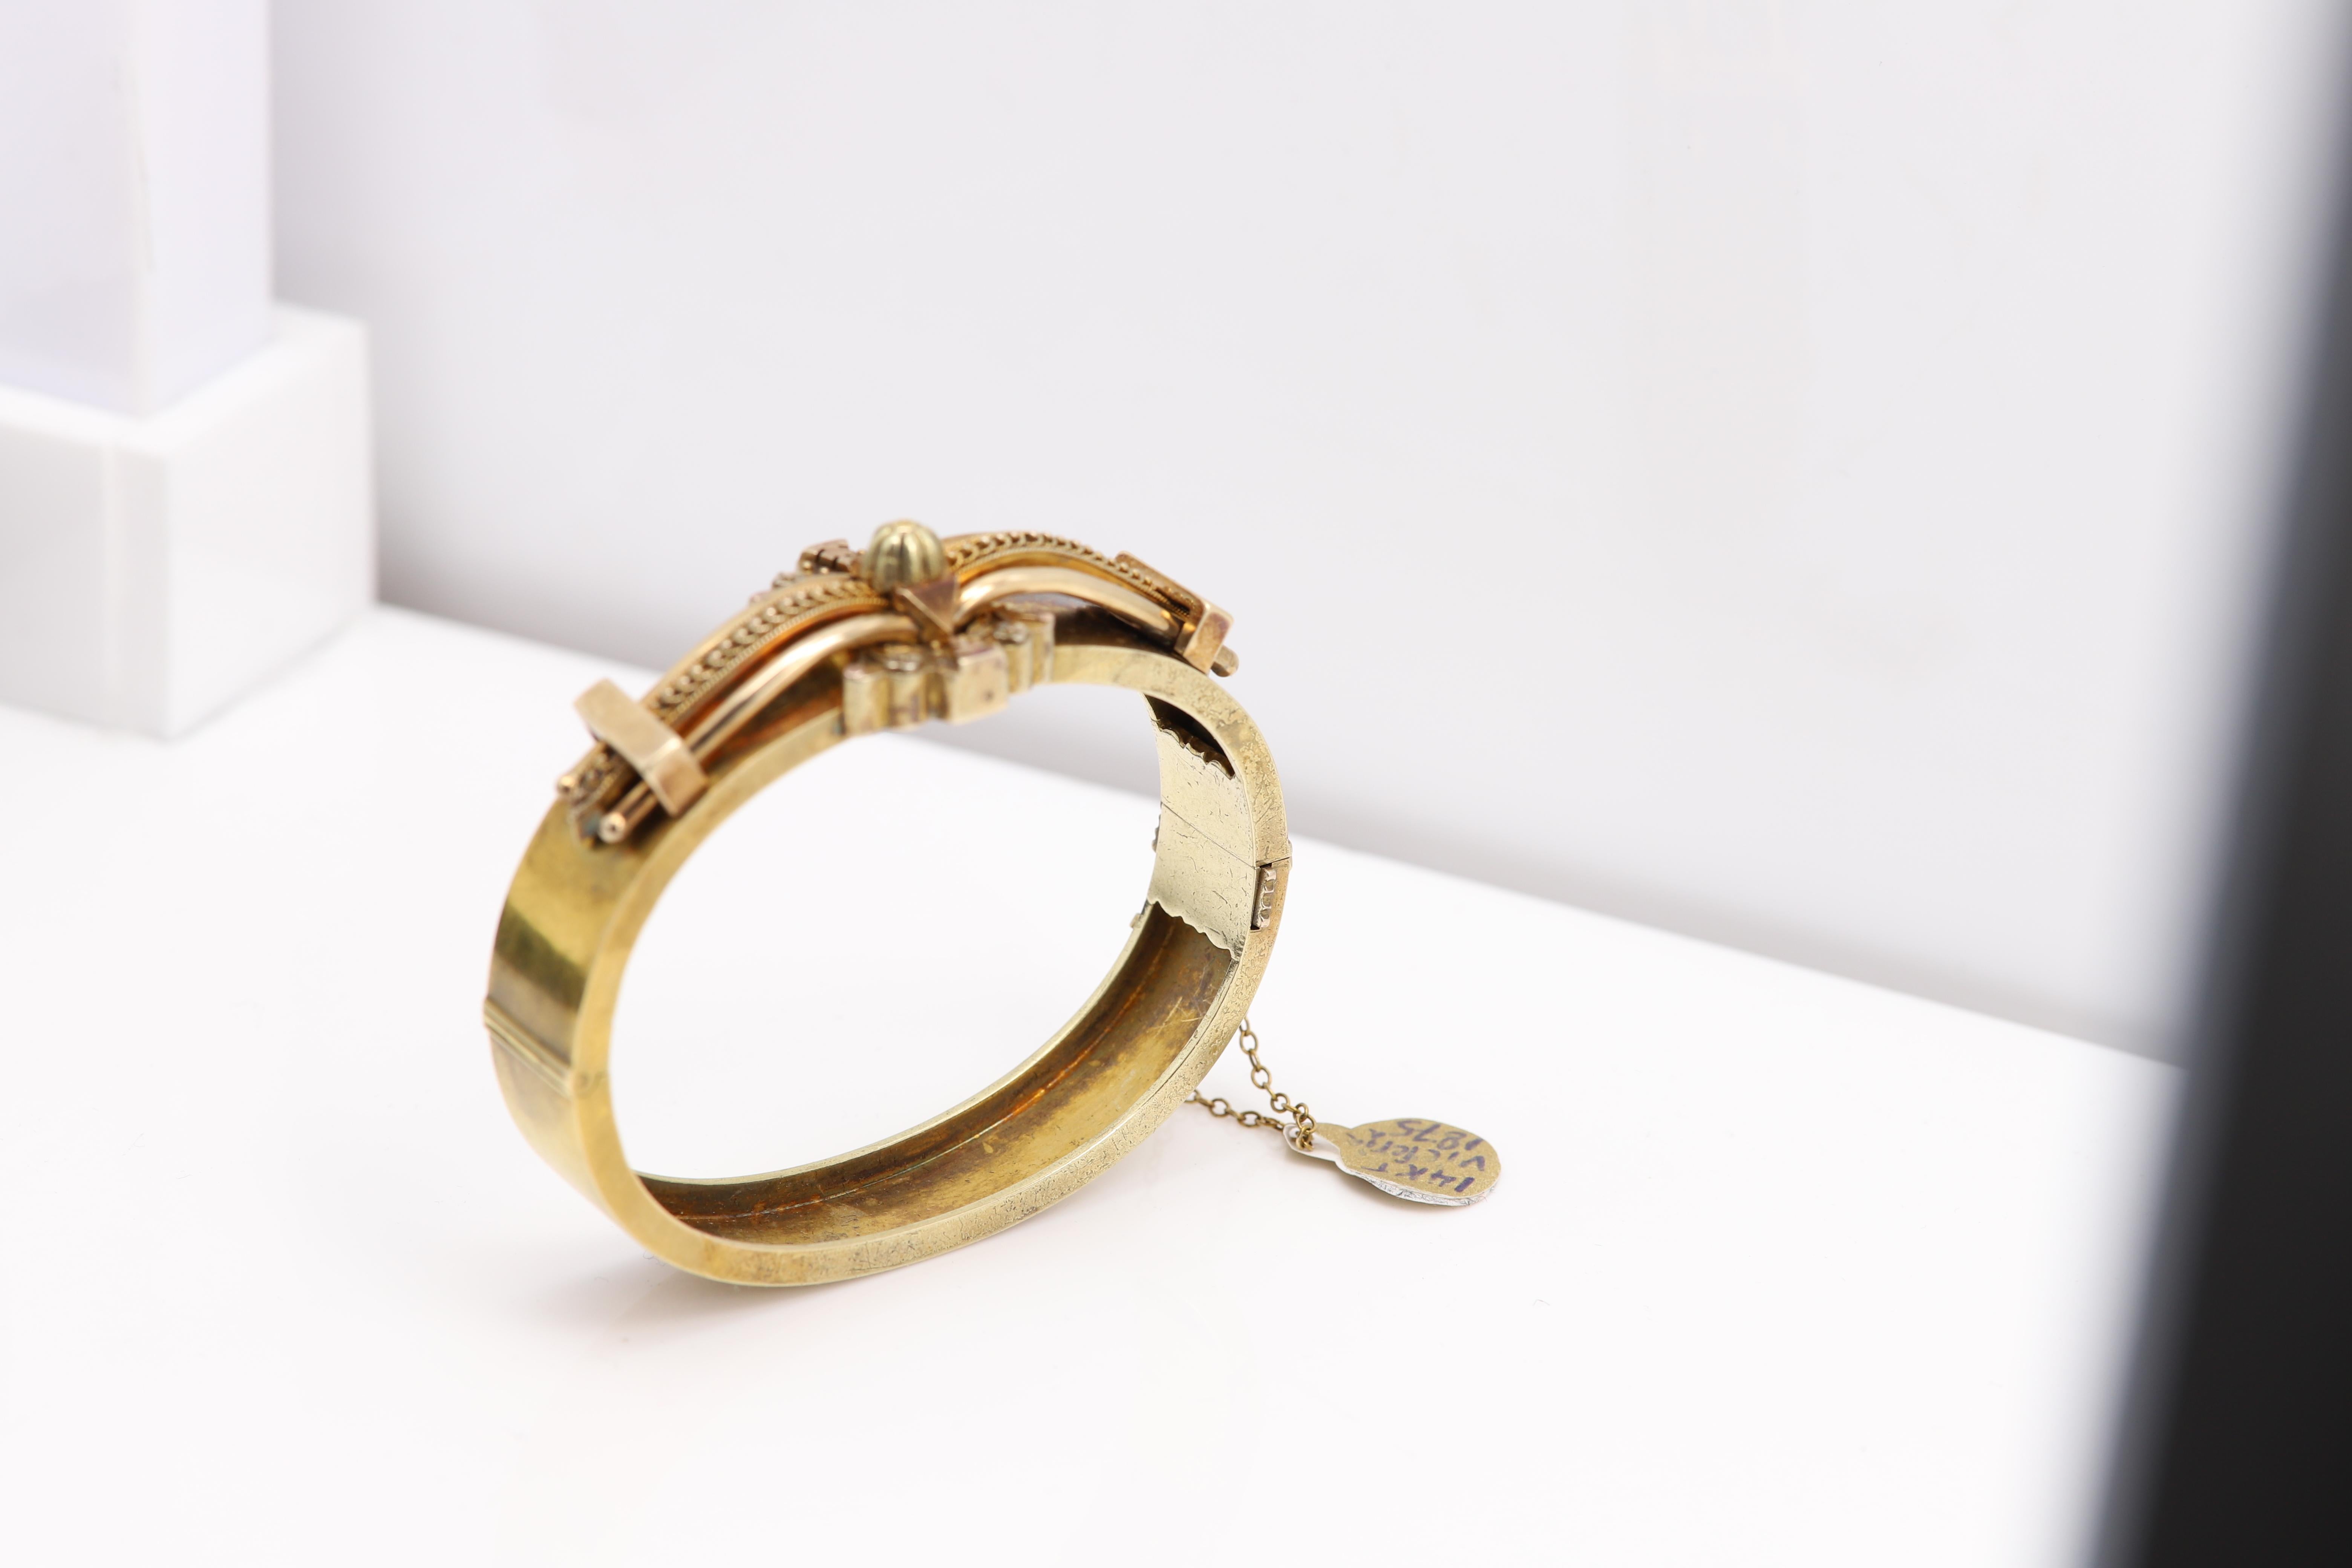 Circa 1875 Victorian Bangle 14 Karat Yellow Gold In Good Condition For Sale In Brooklyn, NY